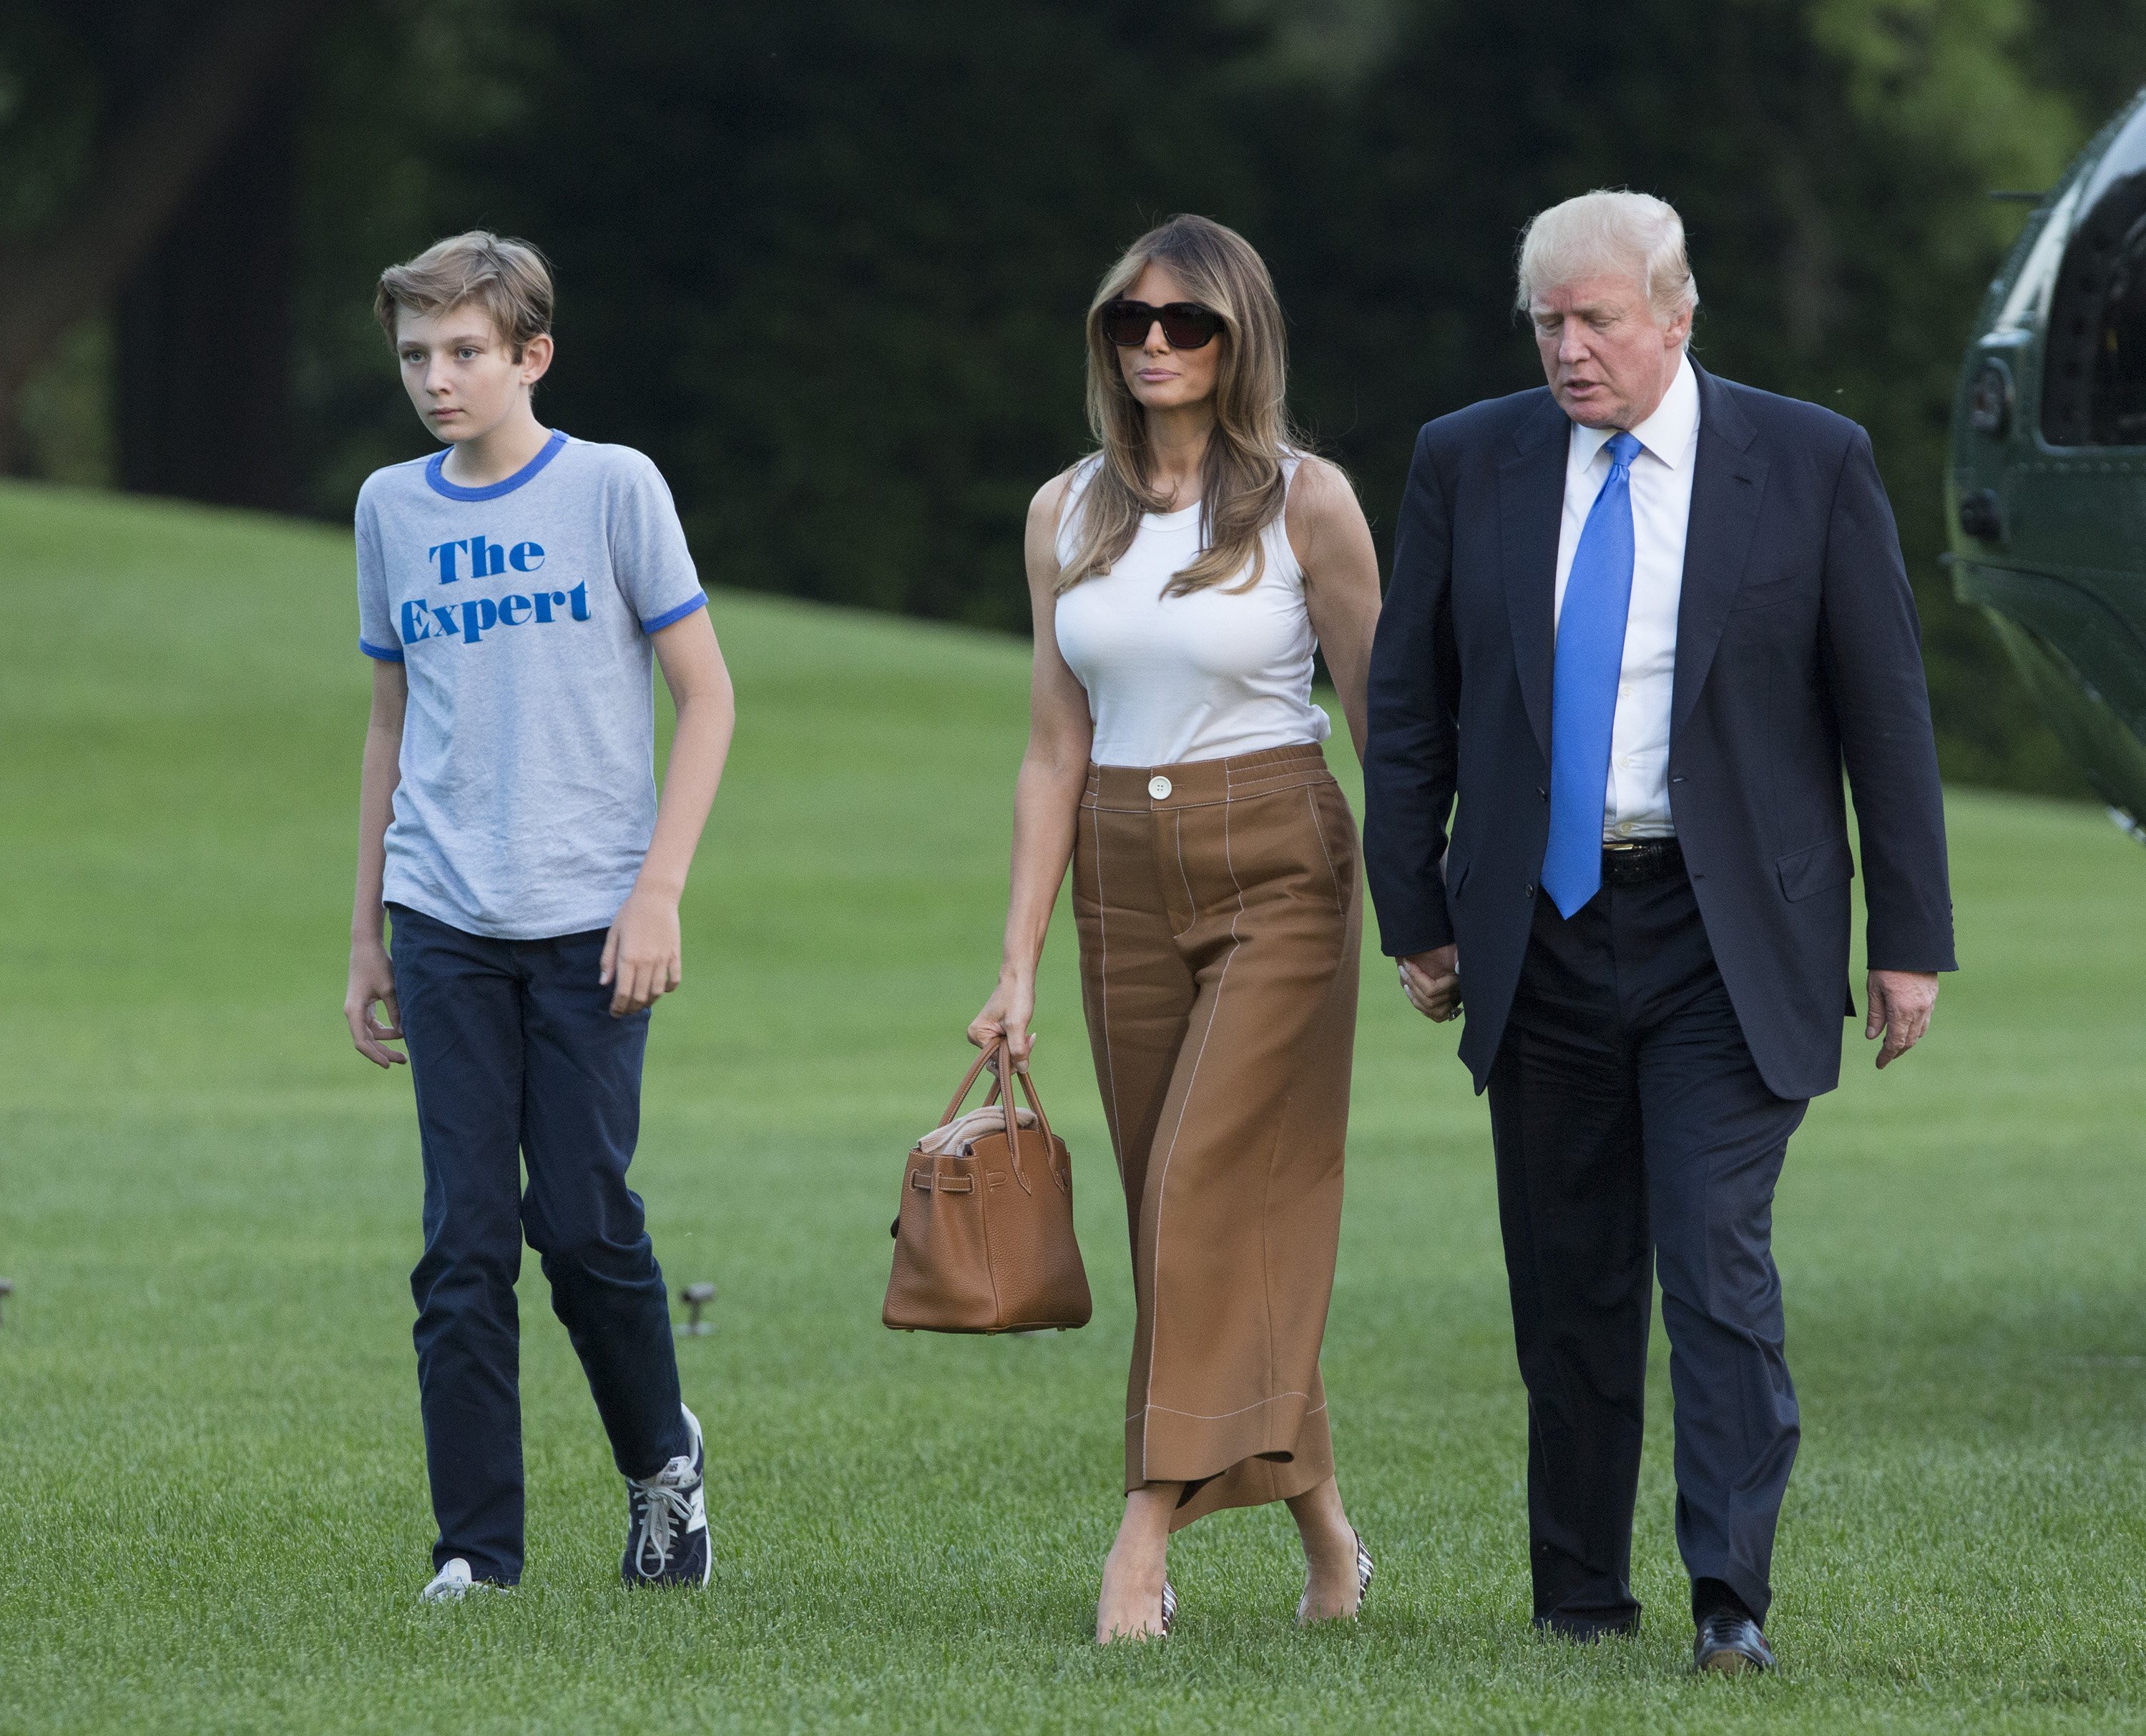 Donald, Melania, and Barron Trump move into the White House in Washington, DC | Photo: Getty Images